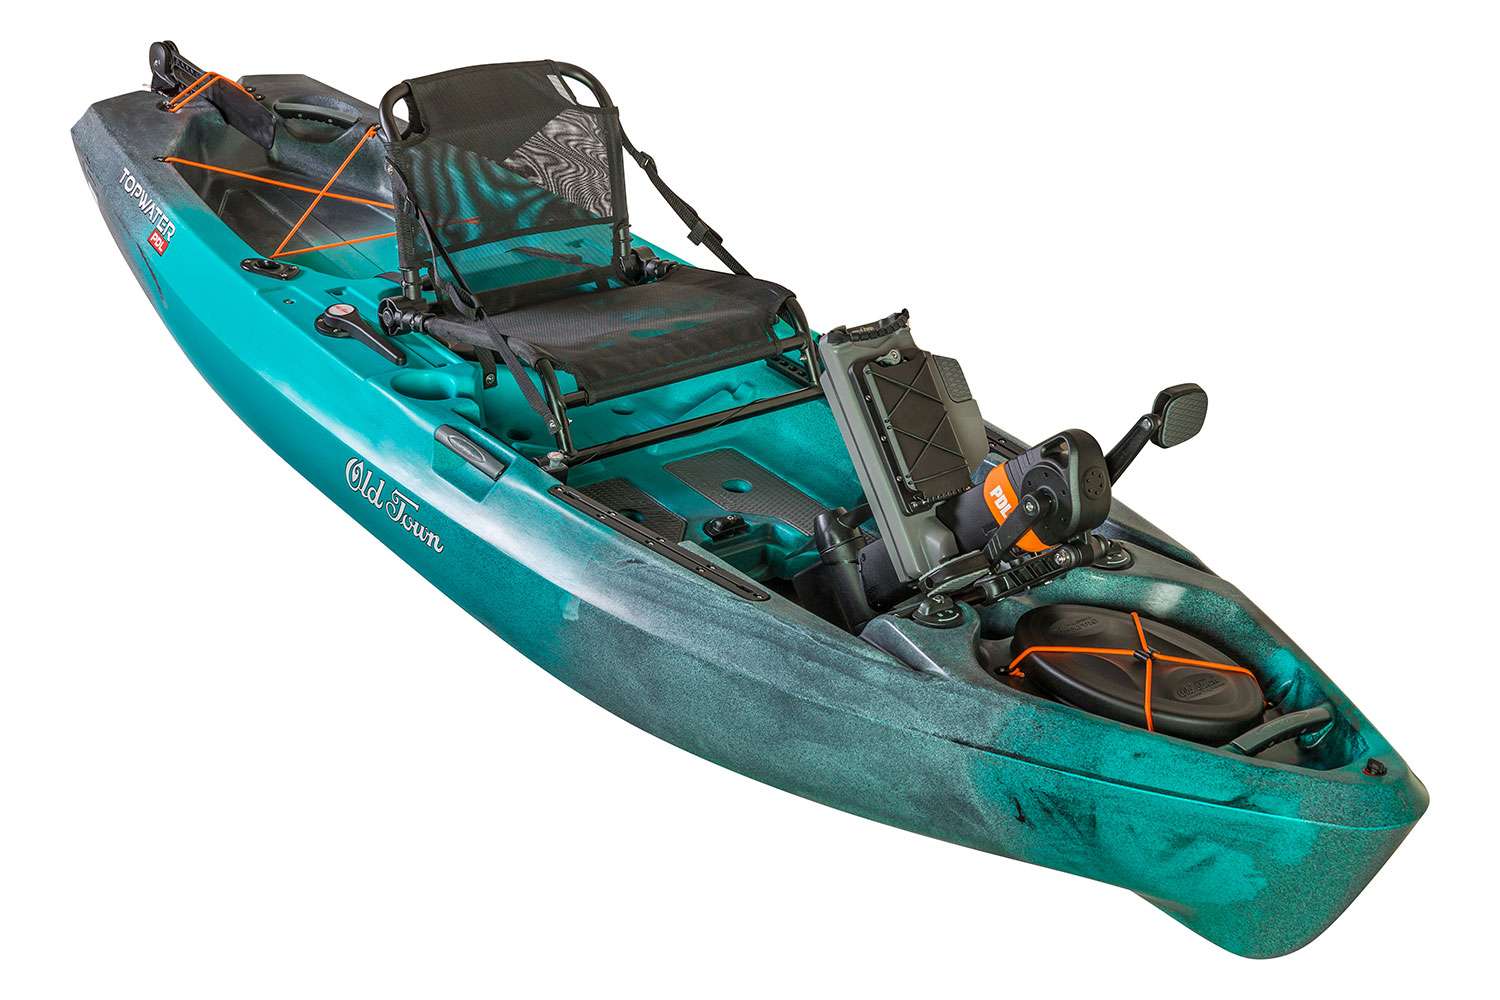 <p><b>Old Town Topwater PDL, $1,999.99</b></p> Old Town sacrificed nothing, delivering a comfortable, hands-free performance fishing kayak thatâs easy to maneuver and even easier to transport. At only 10.5 feet long and weighing only 100 pounds fully outfitted, The Topwater PDL offers large fishing kayak performance, in a compact, lightweight, nimble package. A marriage of stability and performance, the Topwater, with the all-new ultra-stable DoubleU Hull, quietly glides through any water condition while providing a stable hands-free stand-up fishing platform. Featuring the award-winning forward/reverse PDL Drive, the most reliable and easy-to-use pedal drive on the market, and equipped with thoughtful on-board rod & tackle management, The Topwater PDL will impress even the saltiest of anglers.<br> <a href=